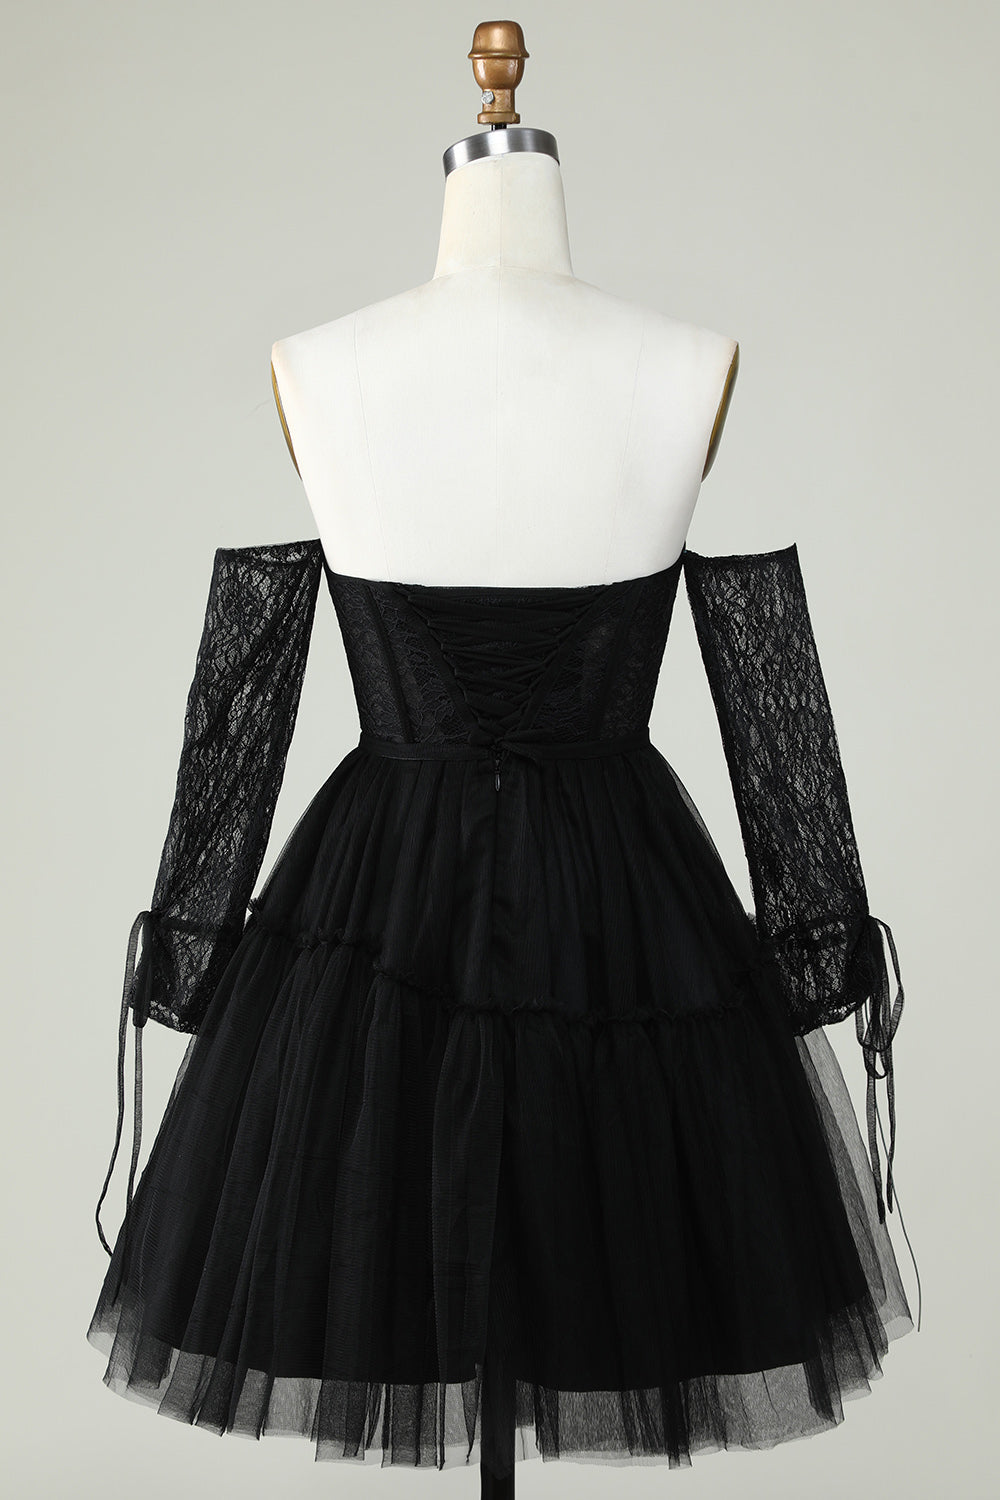 A Line Off the Shoulder Black Corset Cocktail Dress with Long Sleeves